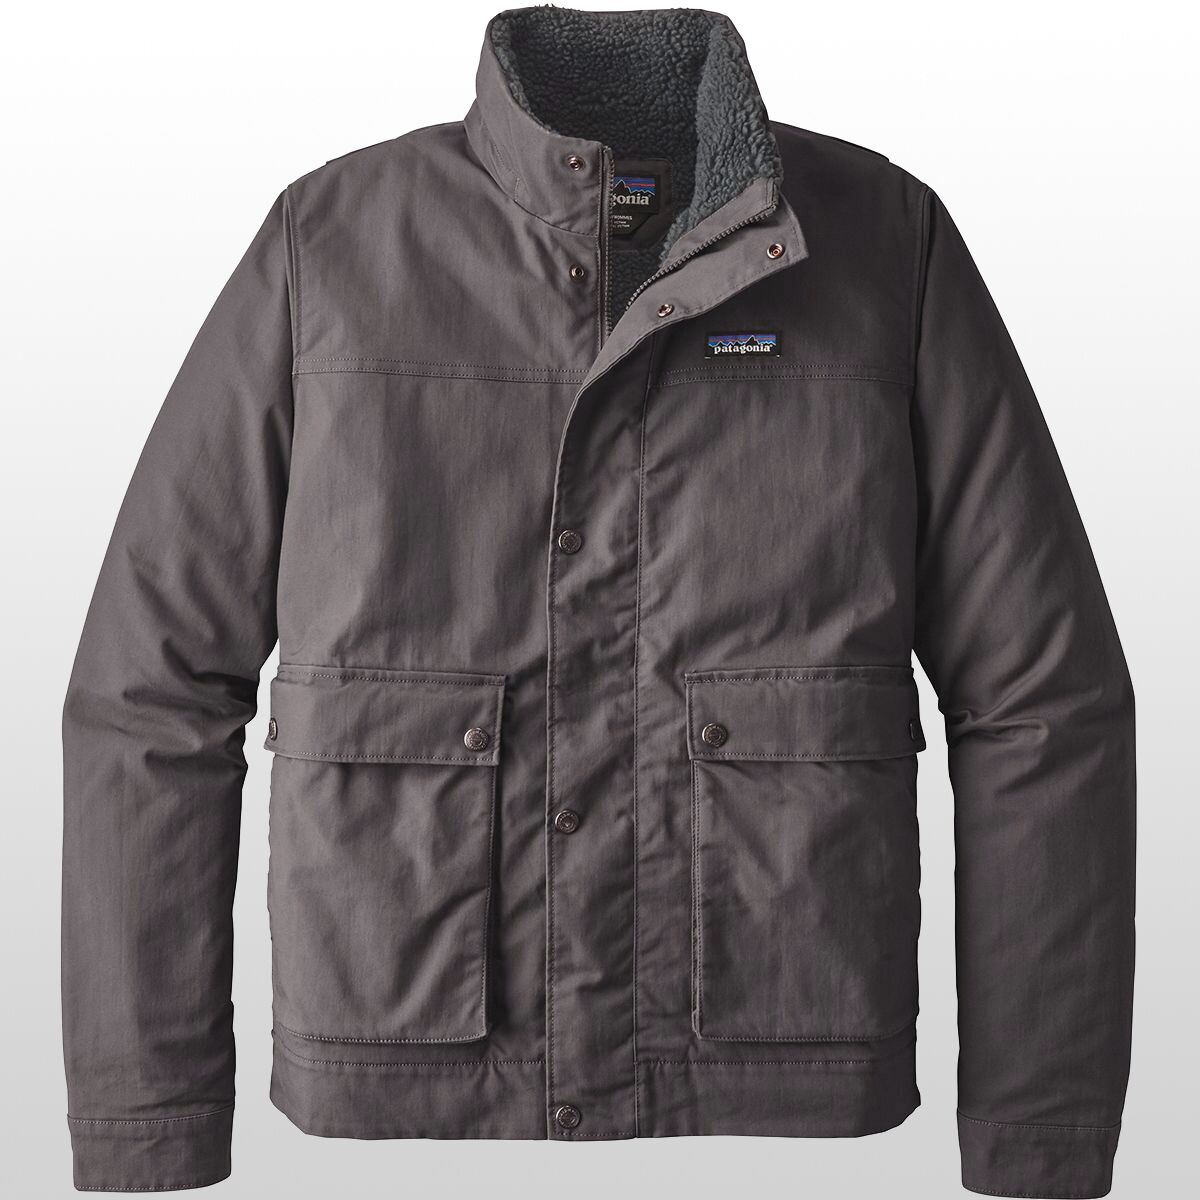 Patagonia Maple Grove Canvas Jacket   Men's   Clothing